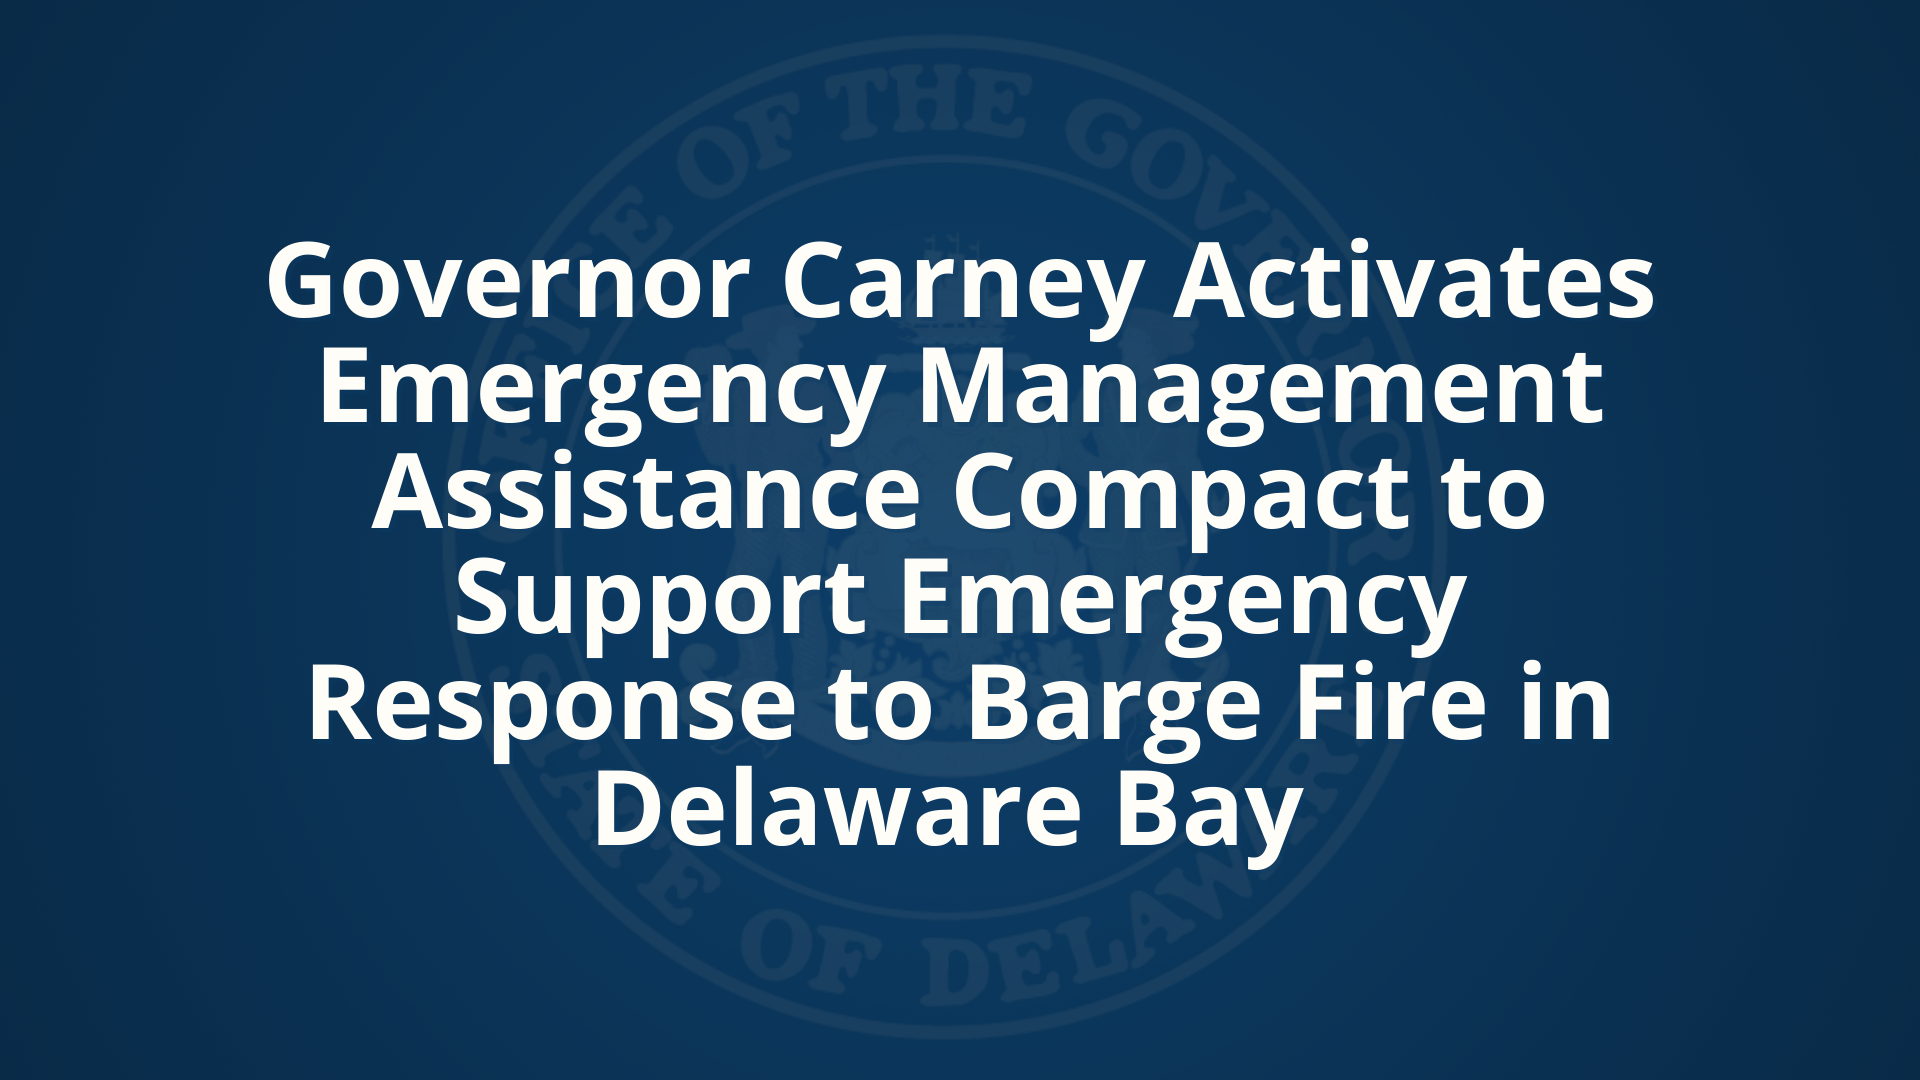 Text that reads, "Governor Carney Activates Emergency Management Assistance Compact to Support Emergency Response to Barge Fire in Delaware Bay"